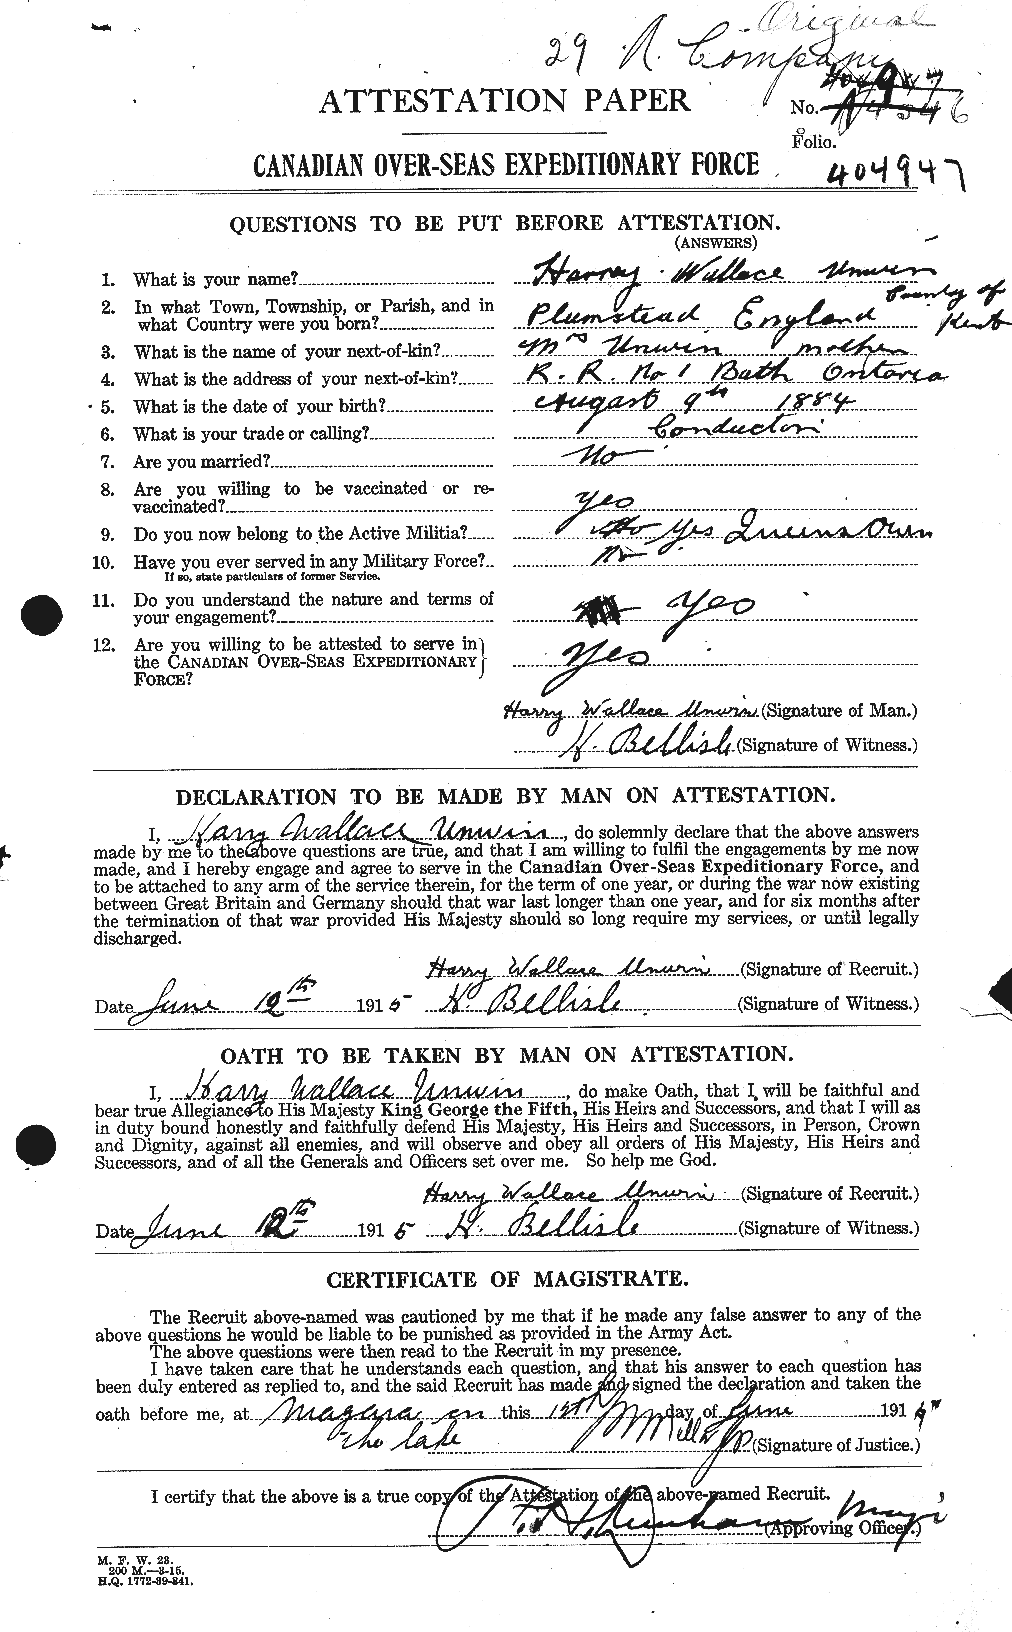 Personnel Records of the First World War - CEF 648073a